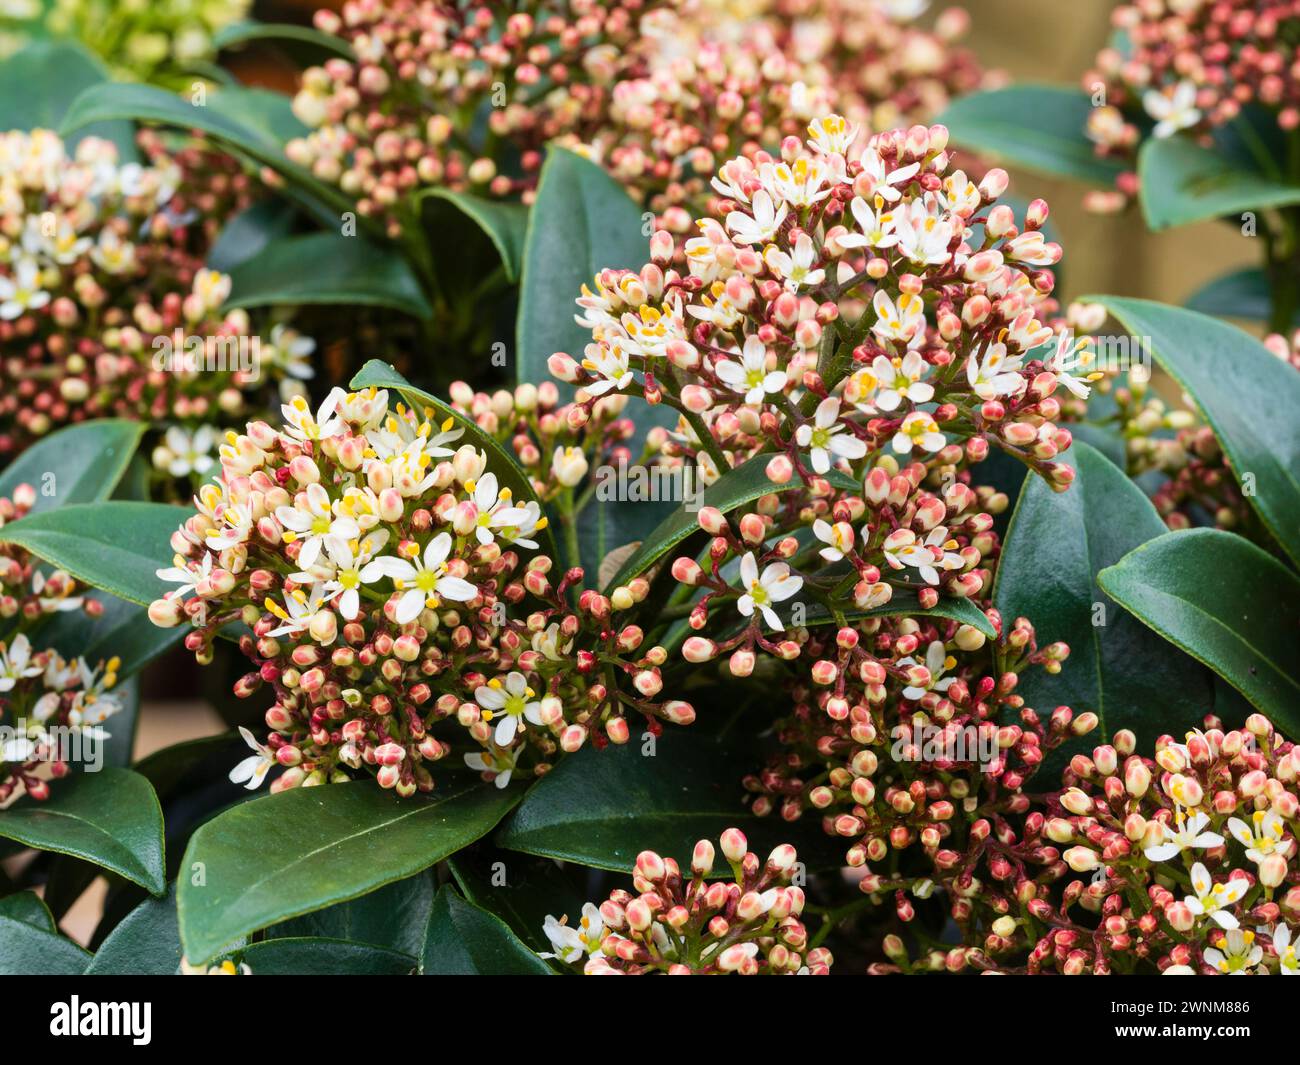 Scented male spring flowers in the panicles of the hardy evergreen shrub, Skimmia japonica 'Marlot' Stock Photo